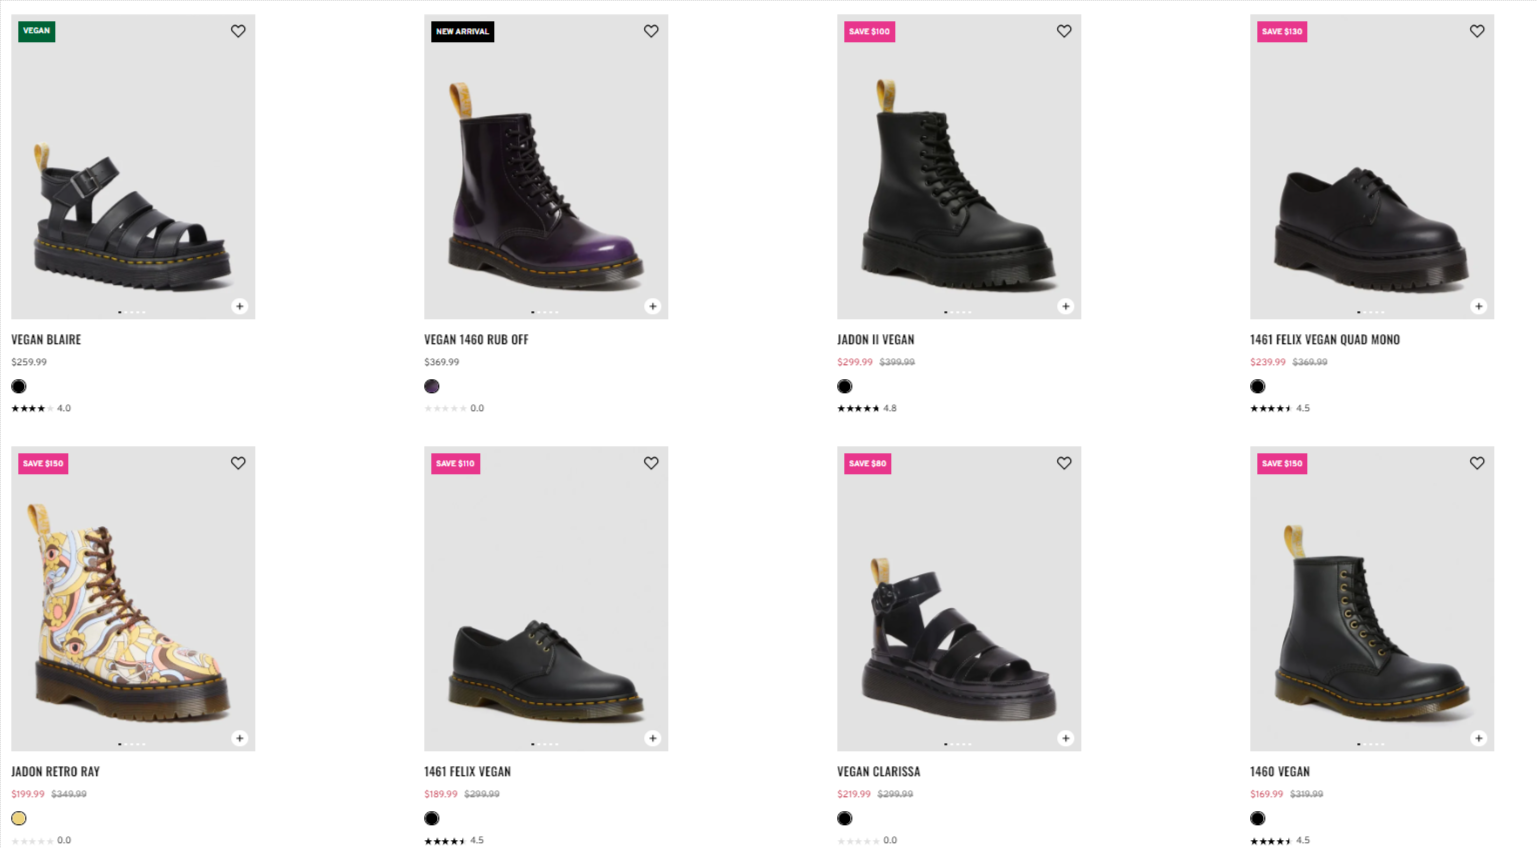 Up to 30% OFF on Dr Martens vegan boots & shoes (up to $150 OFF), starting from $169